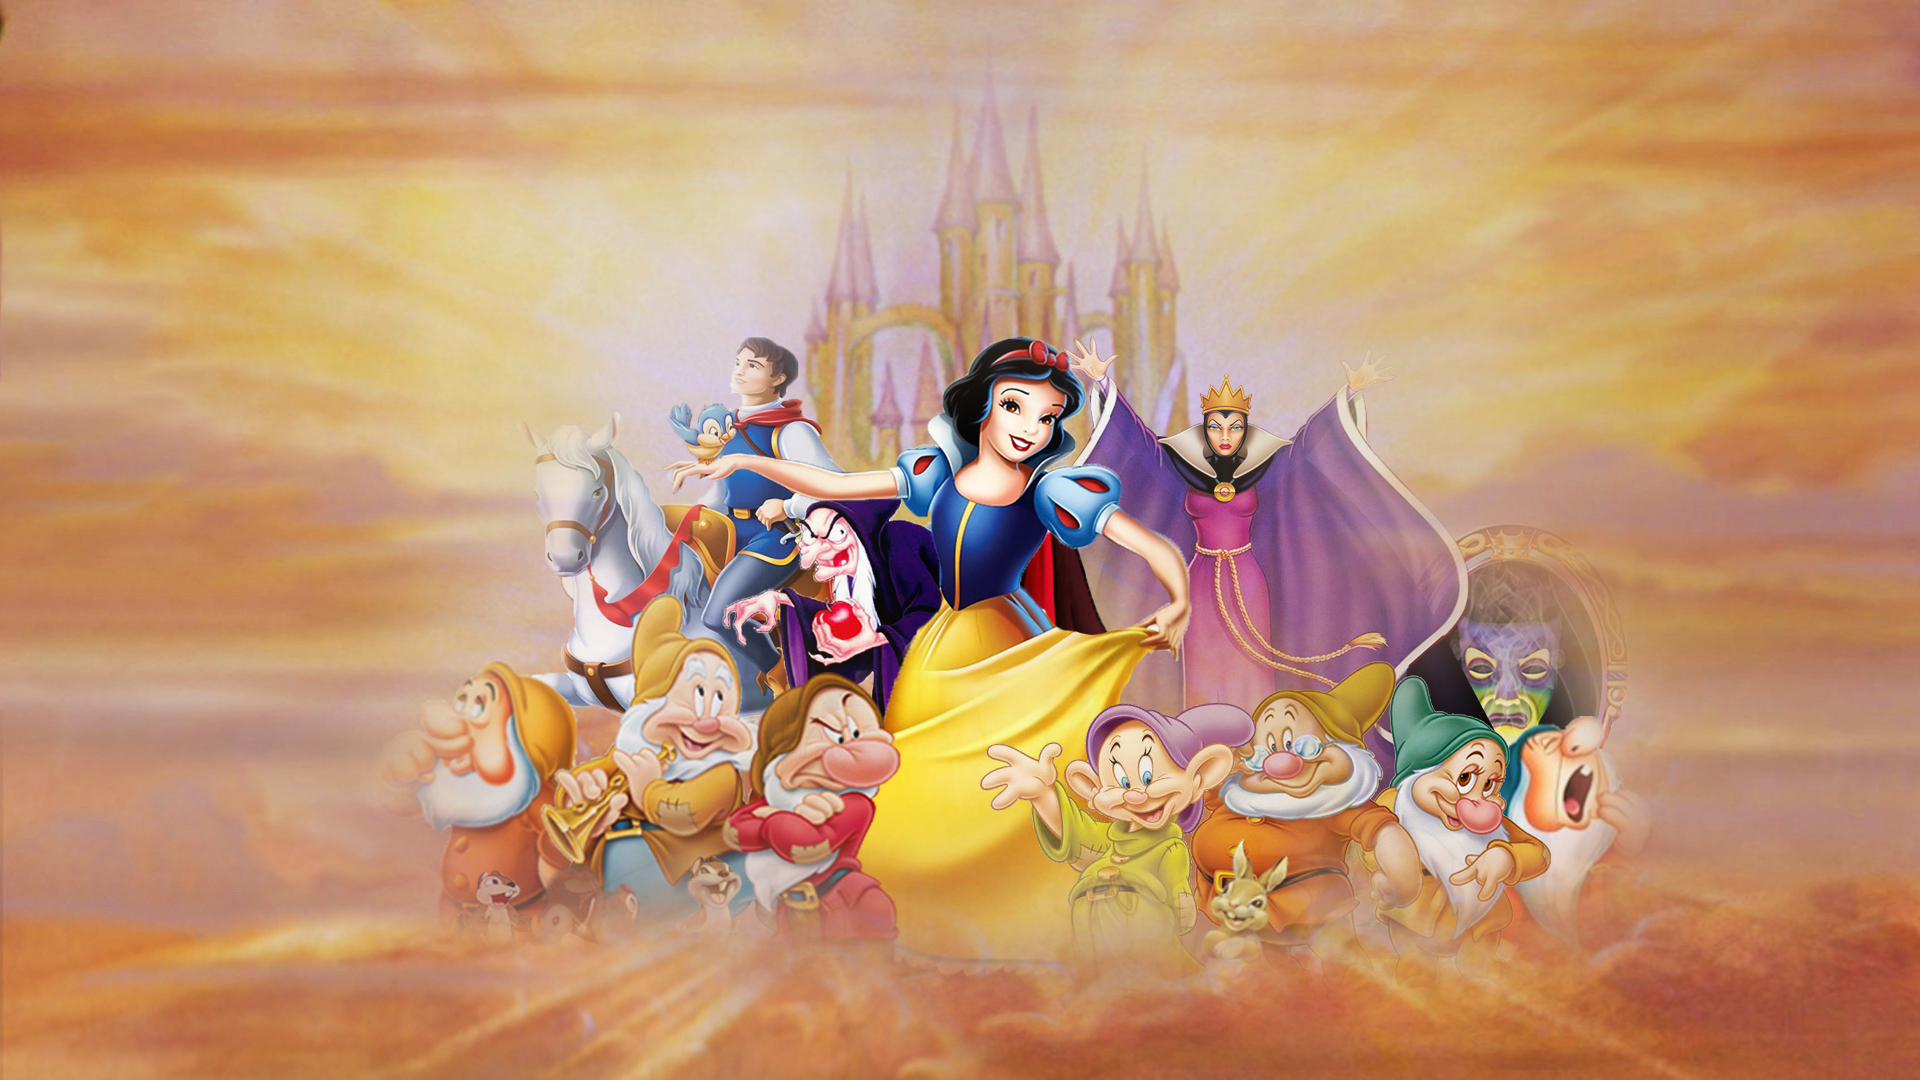 Snow White And The Seven Dwarfs Wallpapers